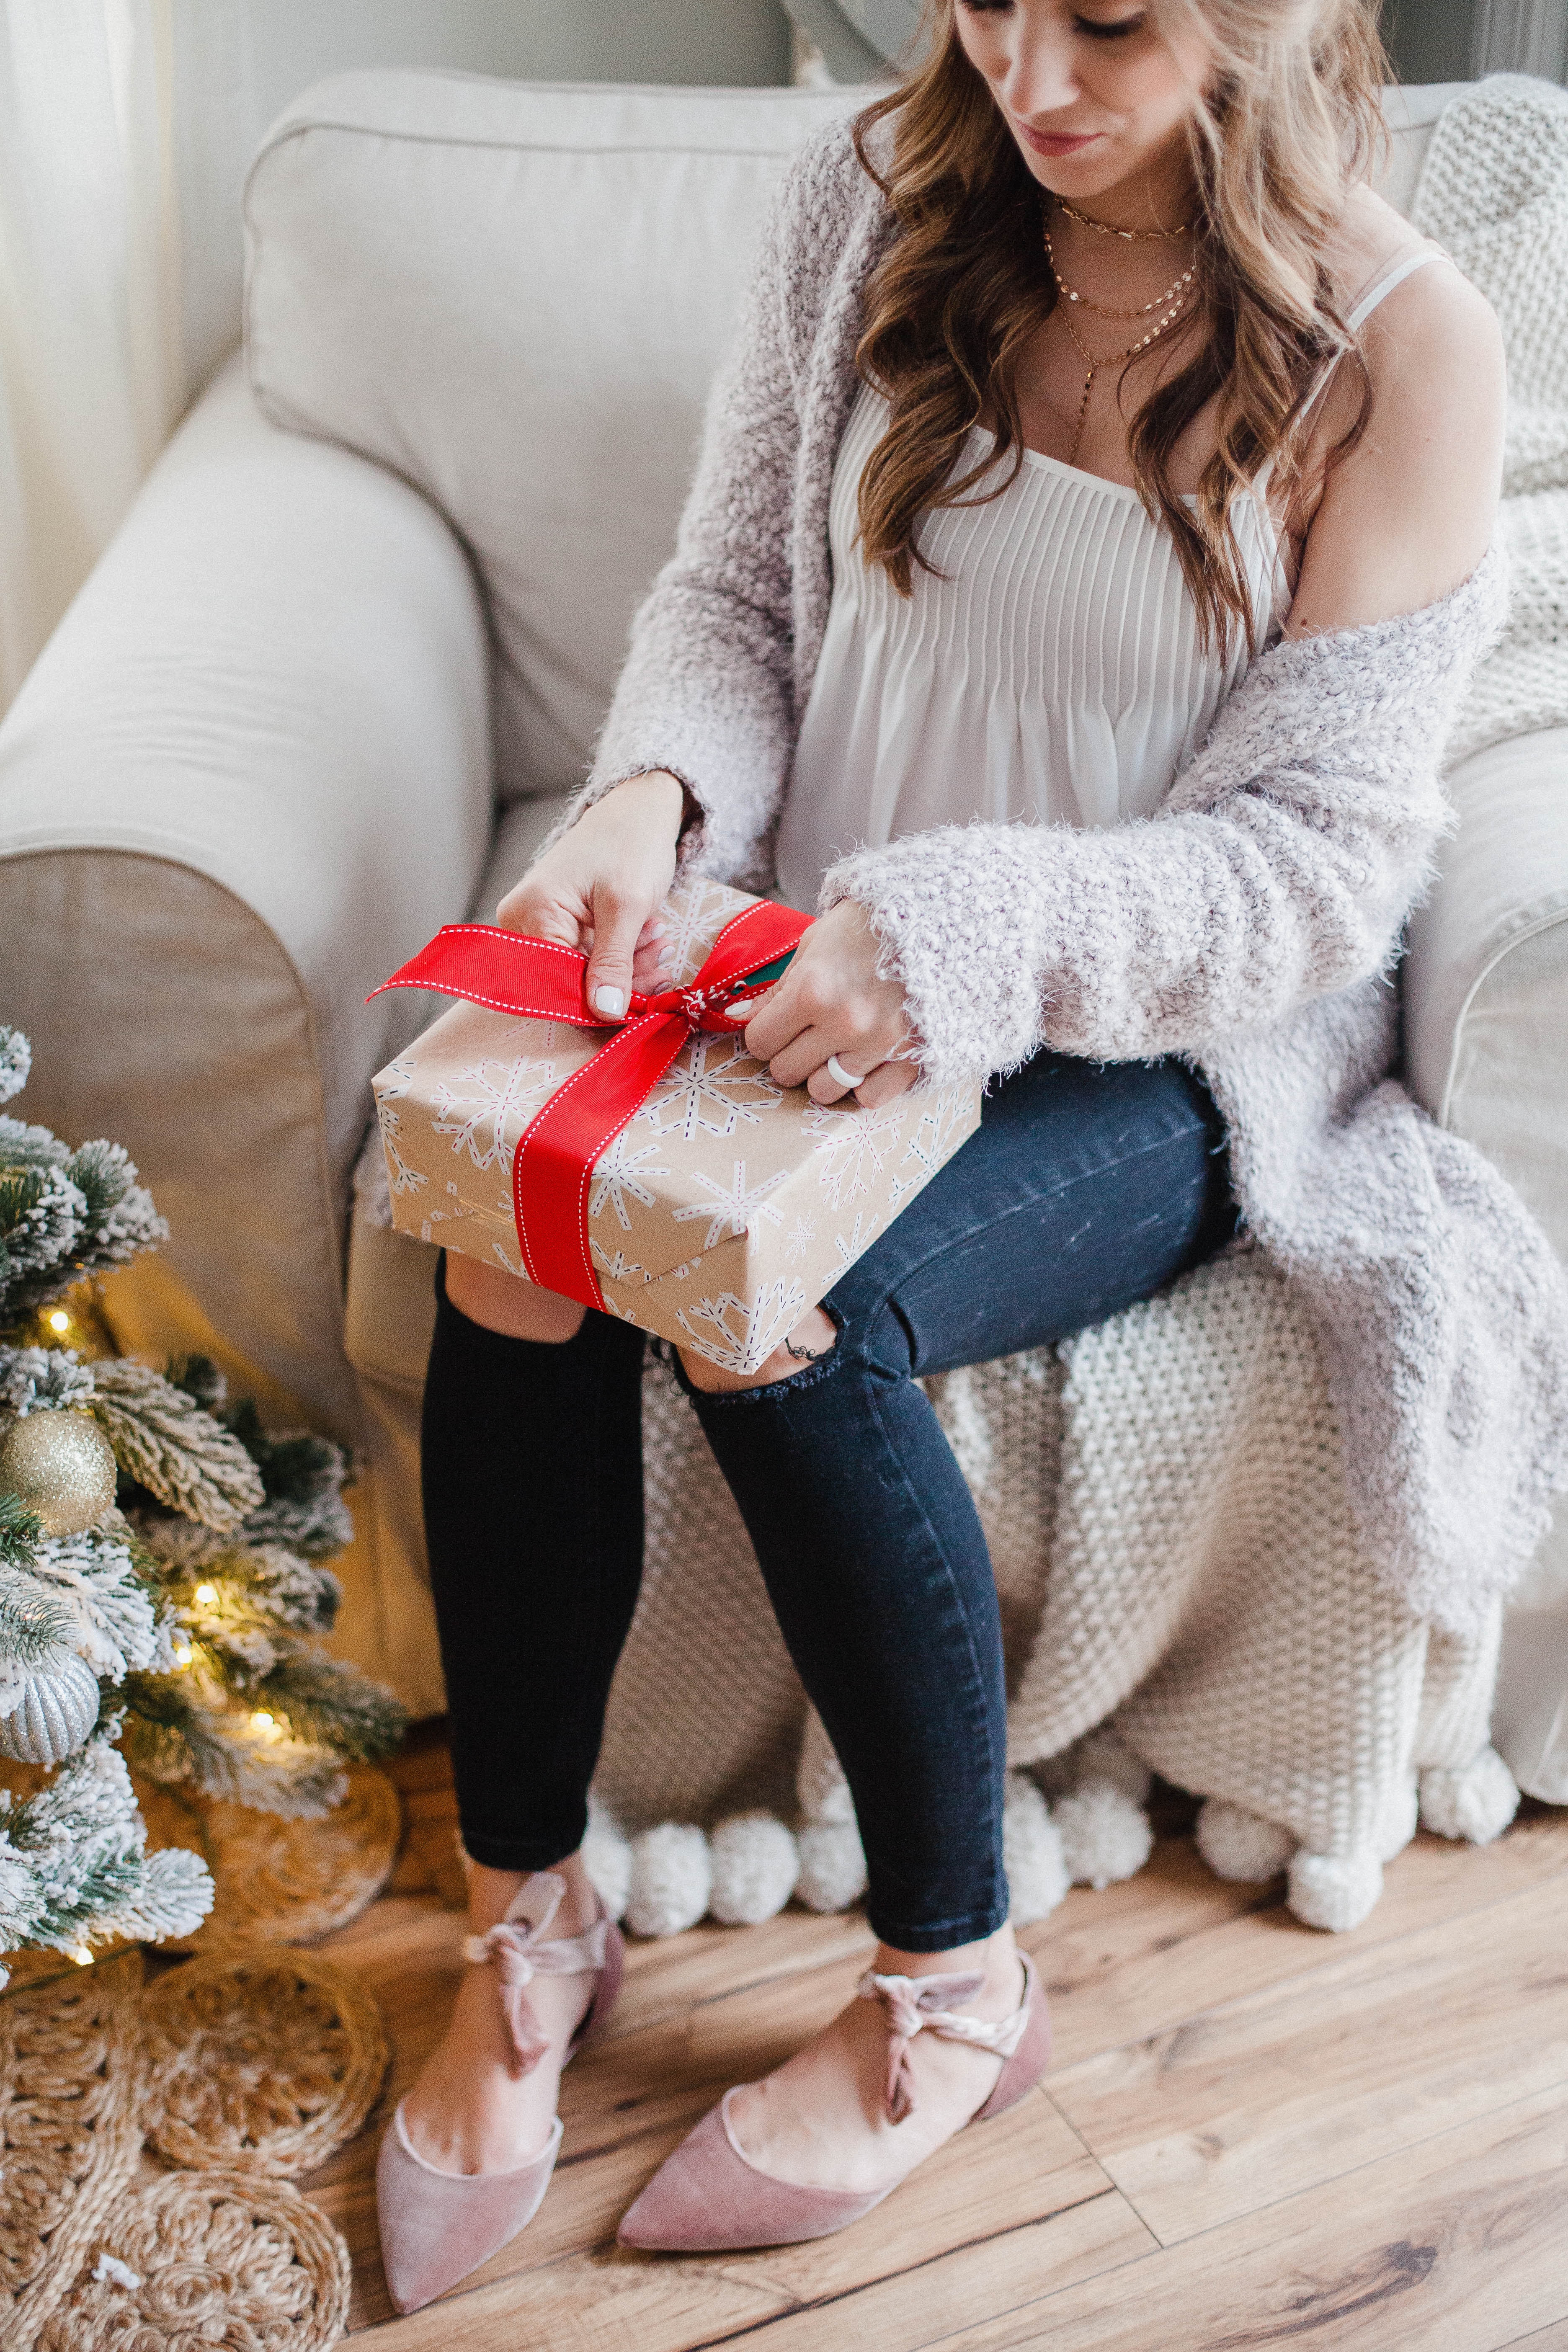 Life and style blogger Lauren McBride shares a Casual Holiday Maternity Outfit that's comfortable yet festive for holiday season. 